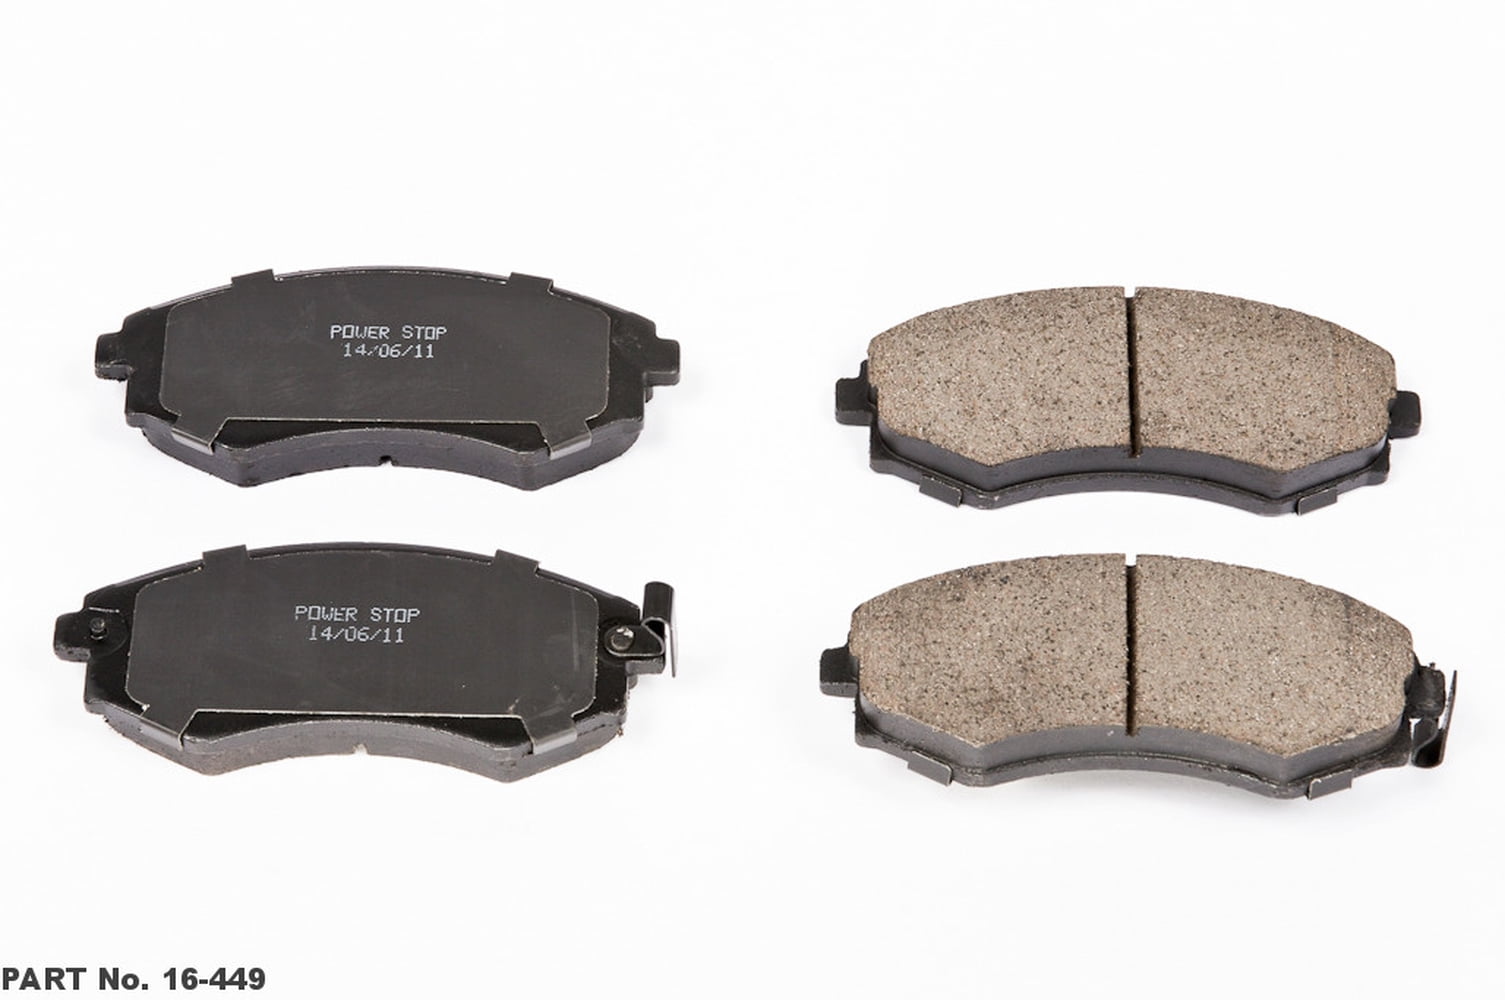 ECCPP FA196 Brake Pads Front and Rear Kevlar Carbon Fiber Replacement Brake Pads Kits Fit for 1998 1999 2001 2002 2003 Triumph Thunderbird 1999 2001 2002 2003 2004 Triumph Tiger 991281-5211-1517032463